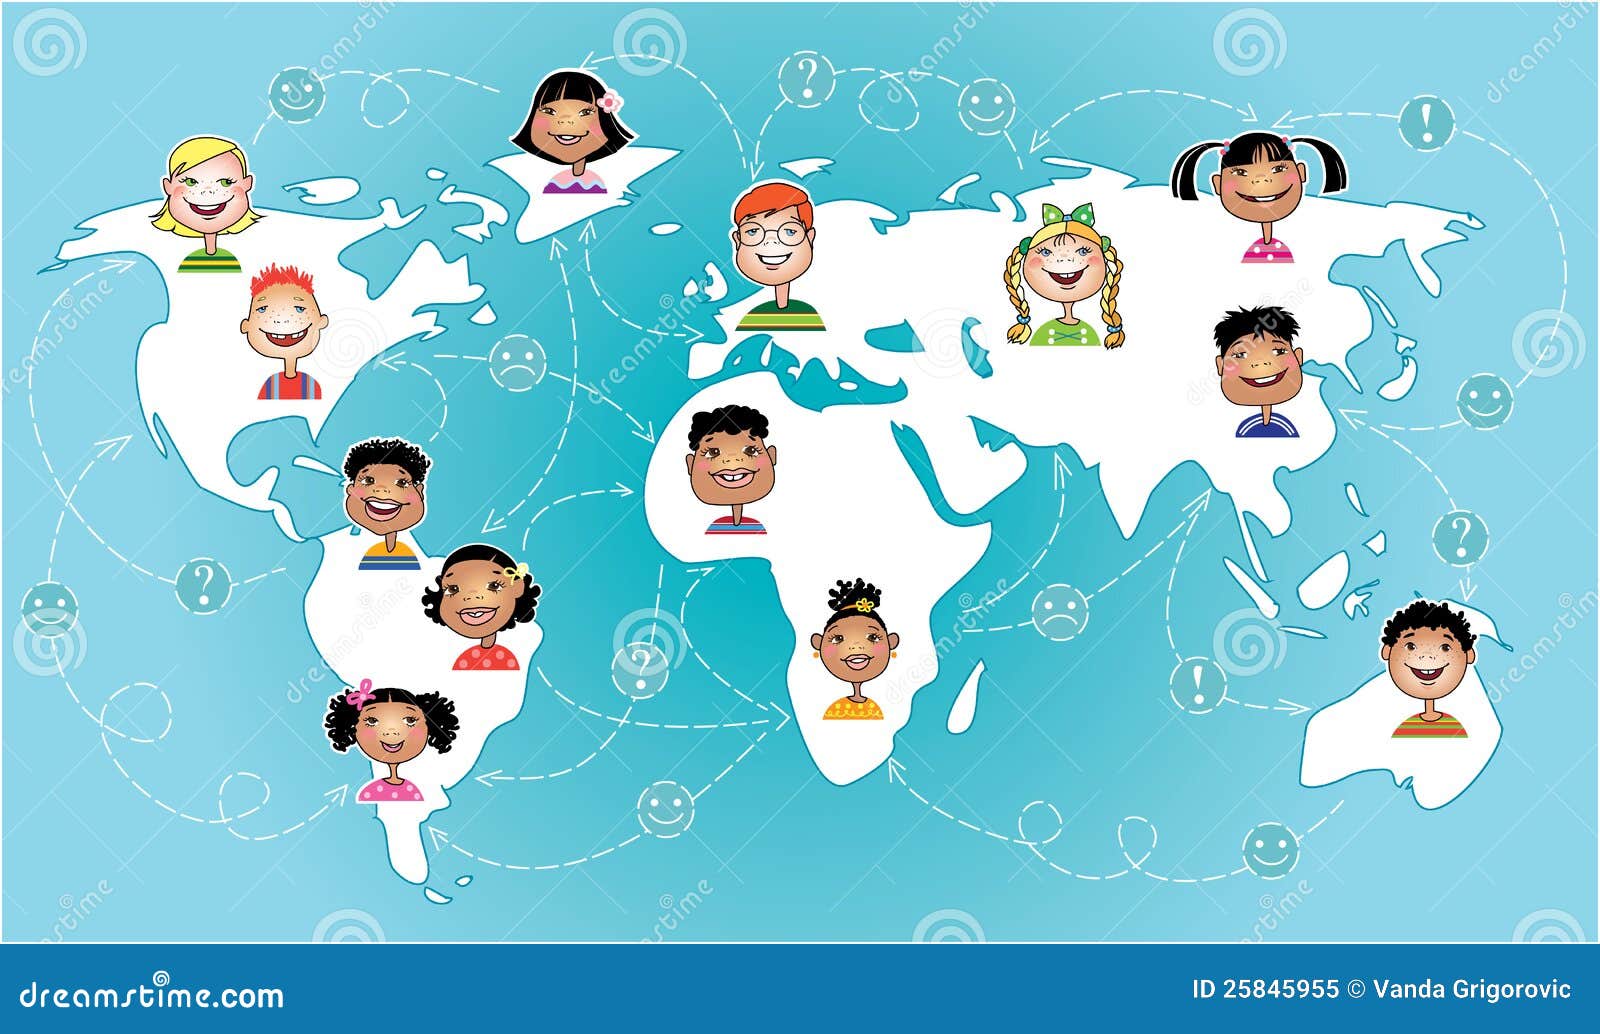 Kids connected worldwide stock vector. Illustration of countries